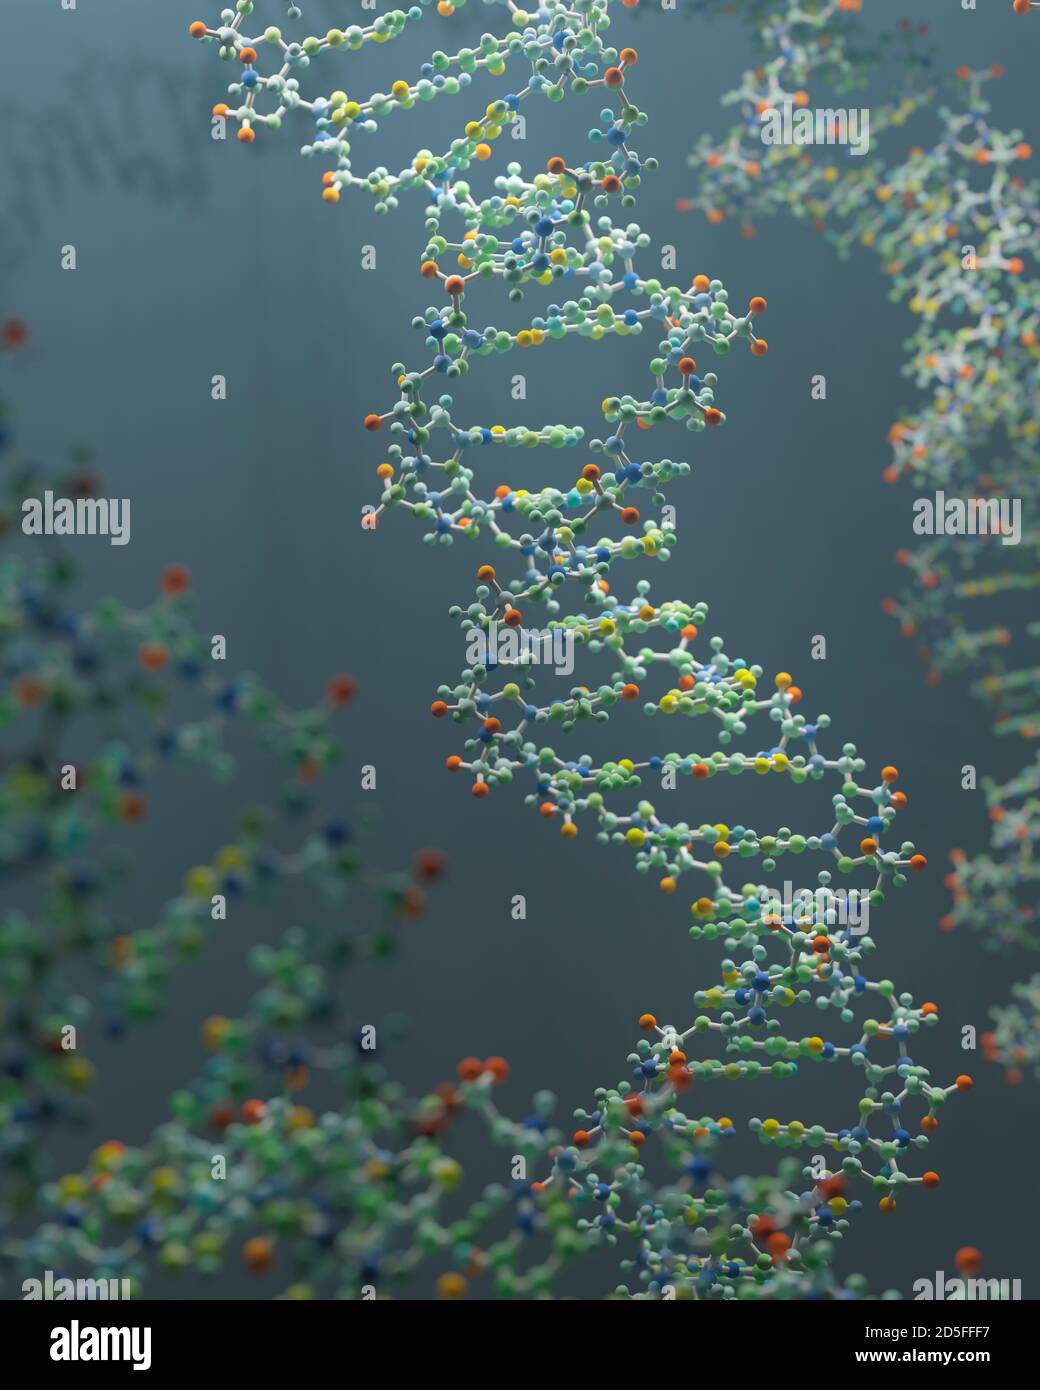 DNA is a molecule and a double helix carrying genetic instructions for the development, functioning, growth and reproduction of all known organisms. Stock Photo